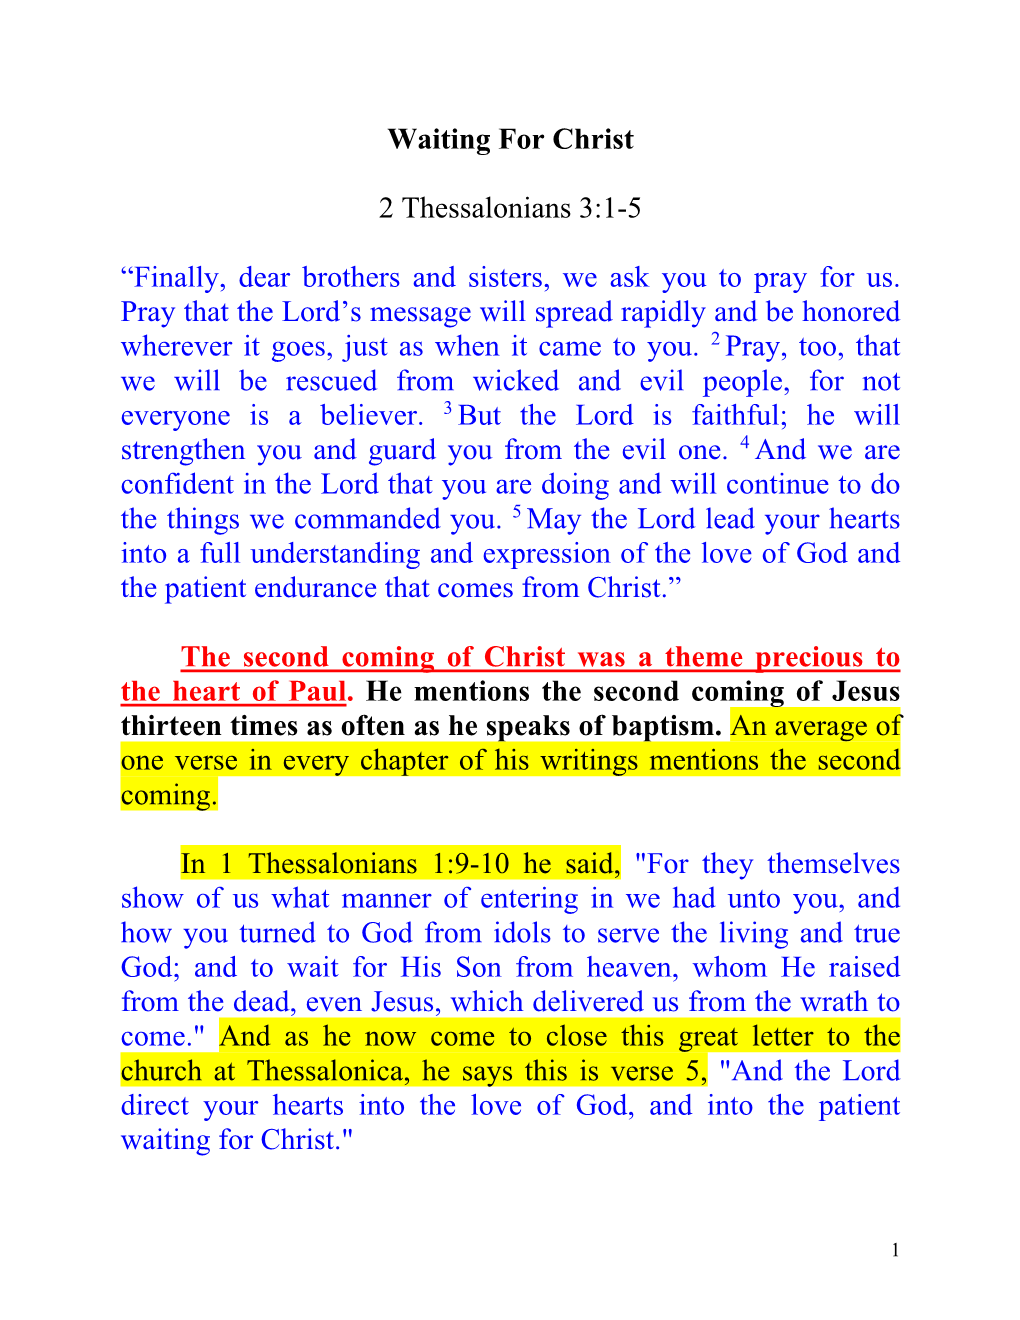 Waiting for Christ 2 Thessalonians 3:1-5